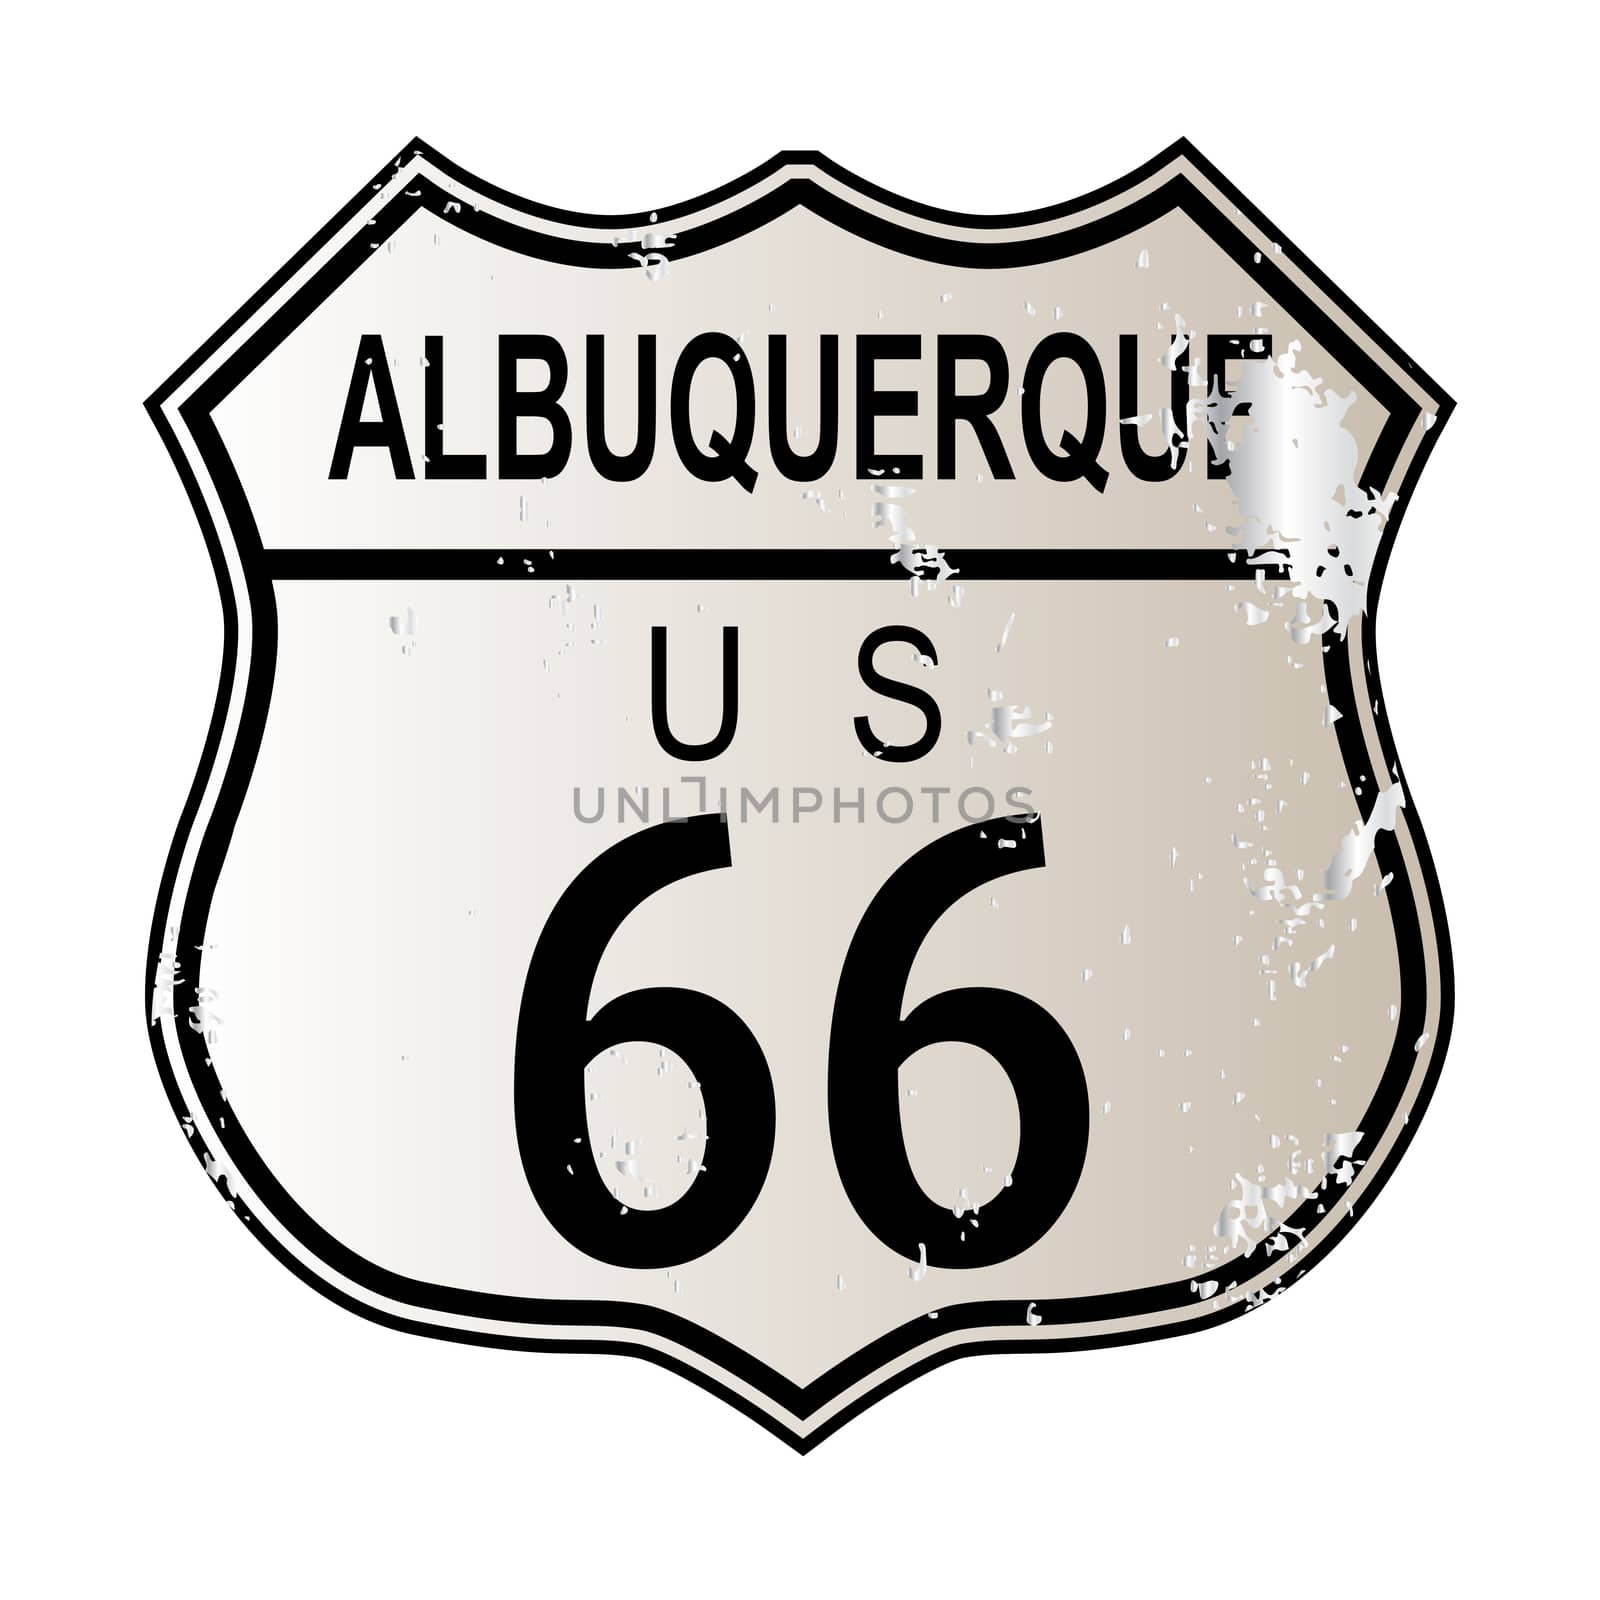 Albuquerque Route 66 Sign by Bigalbaloo